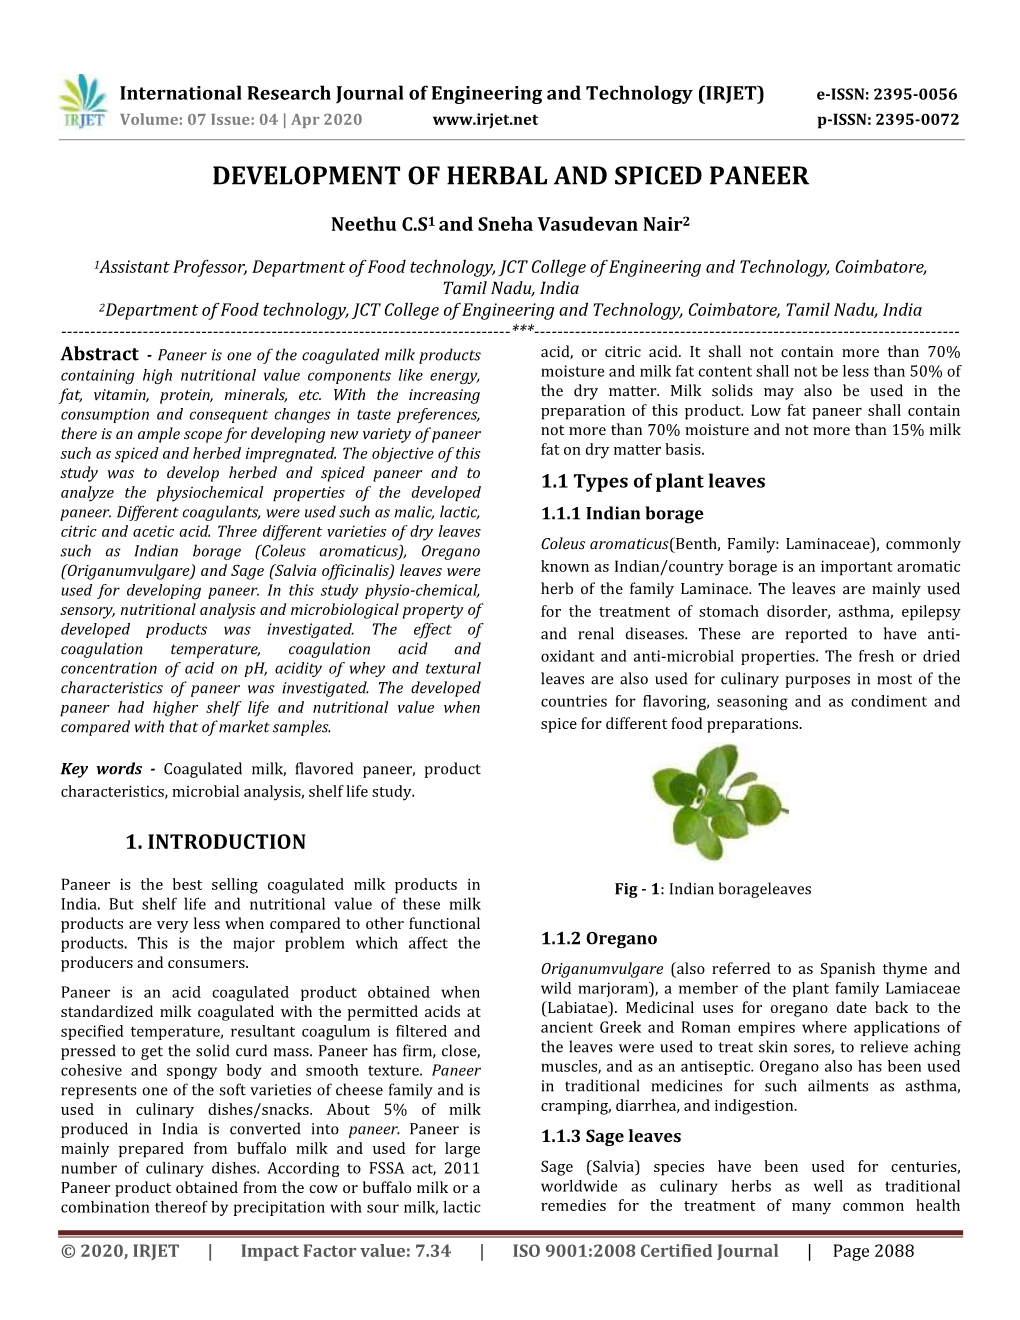 Development of Herbal and Spiced Paneer